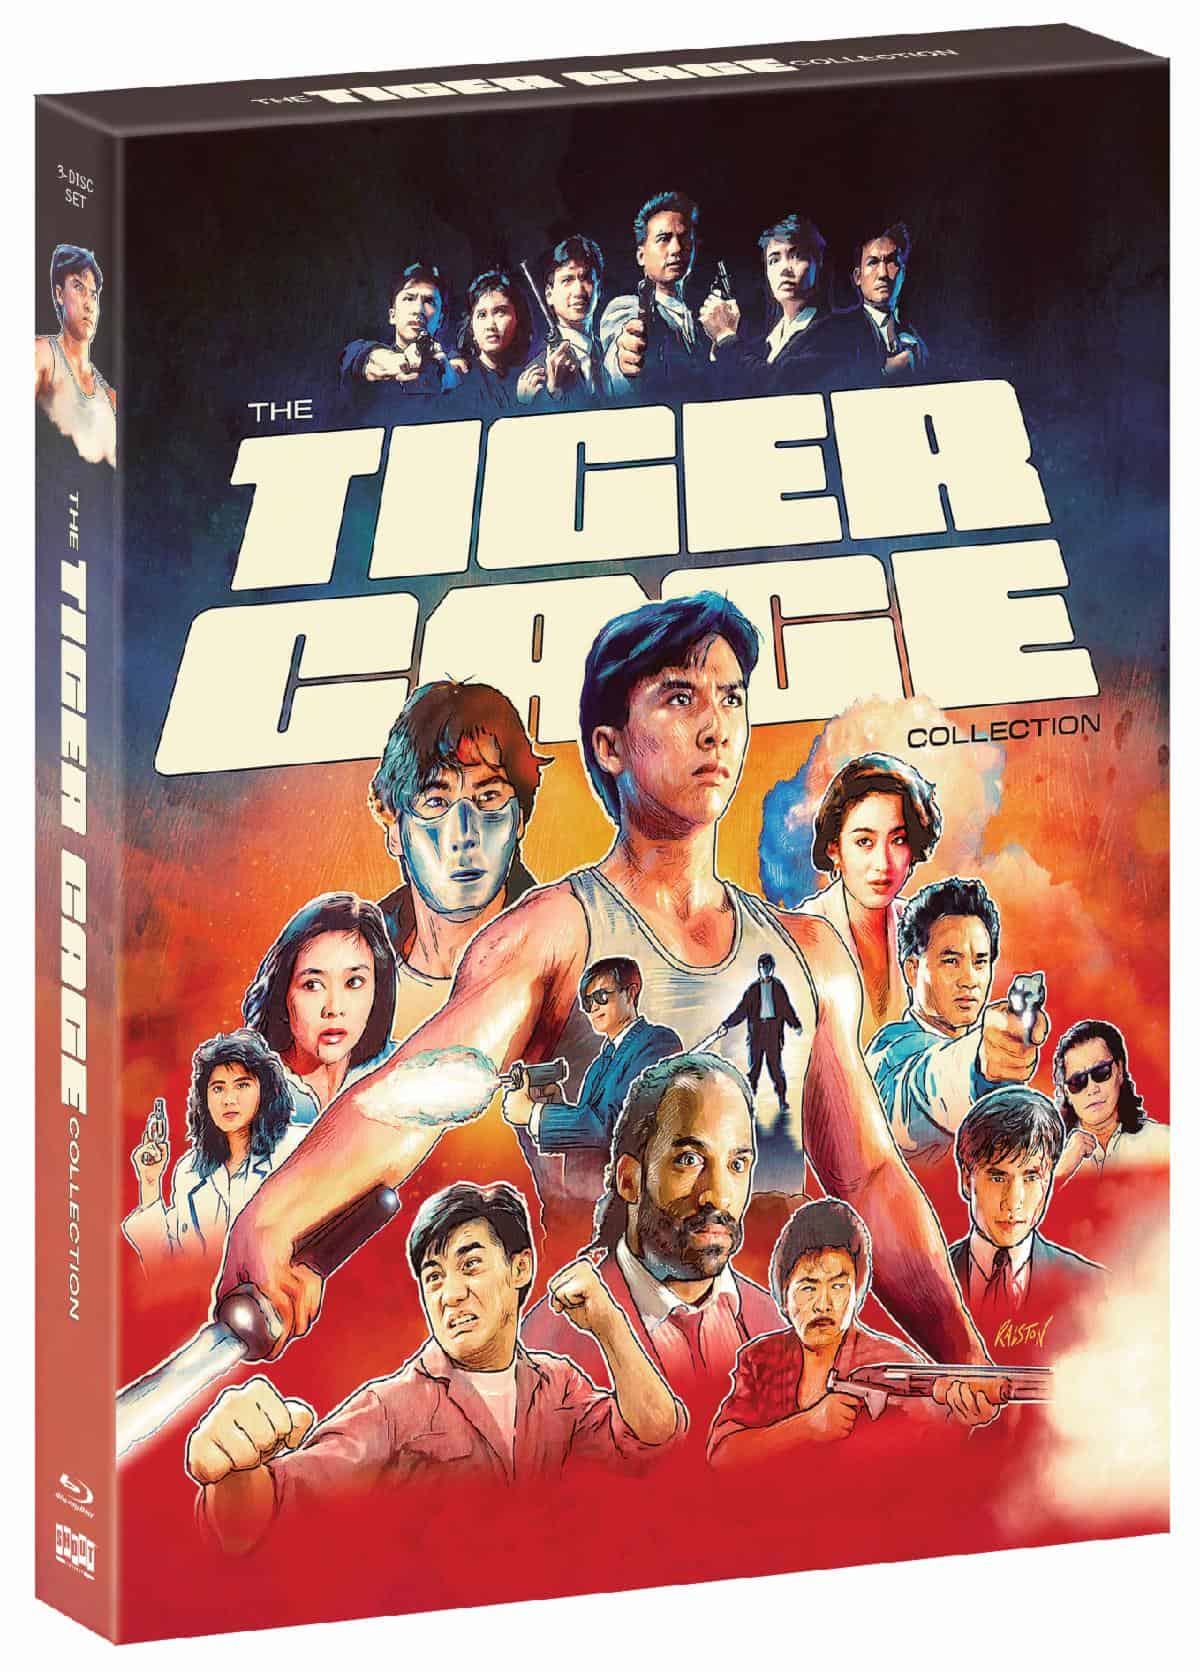 The Tiger Cage Collection hits Blu-ray on May 9th from Shout! 1